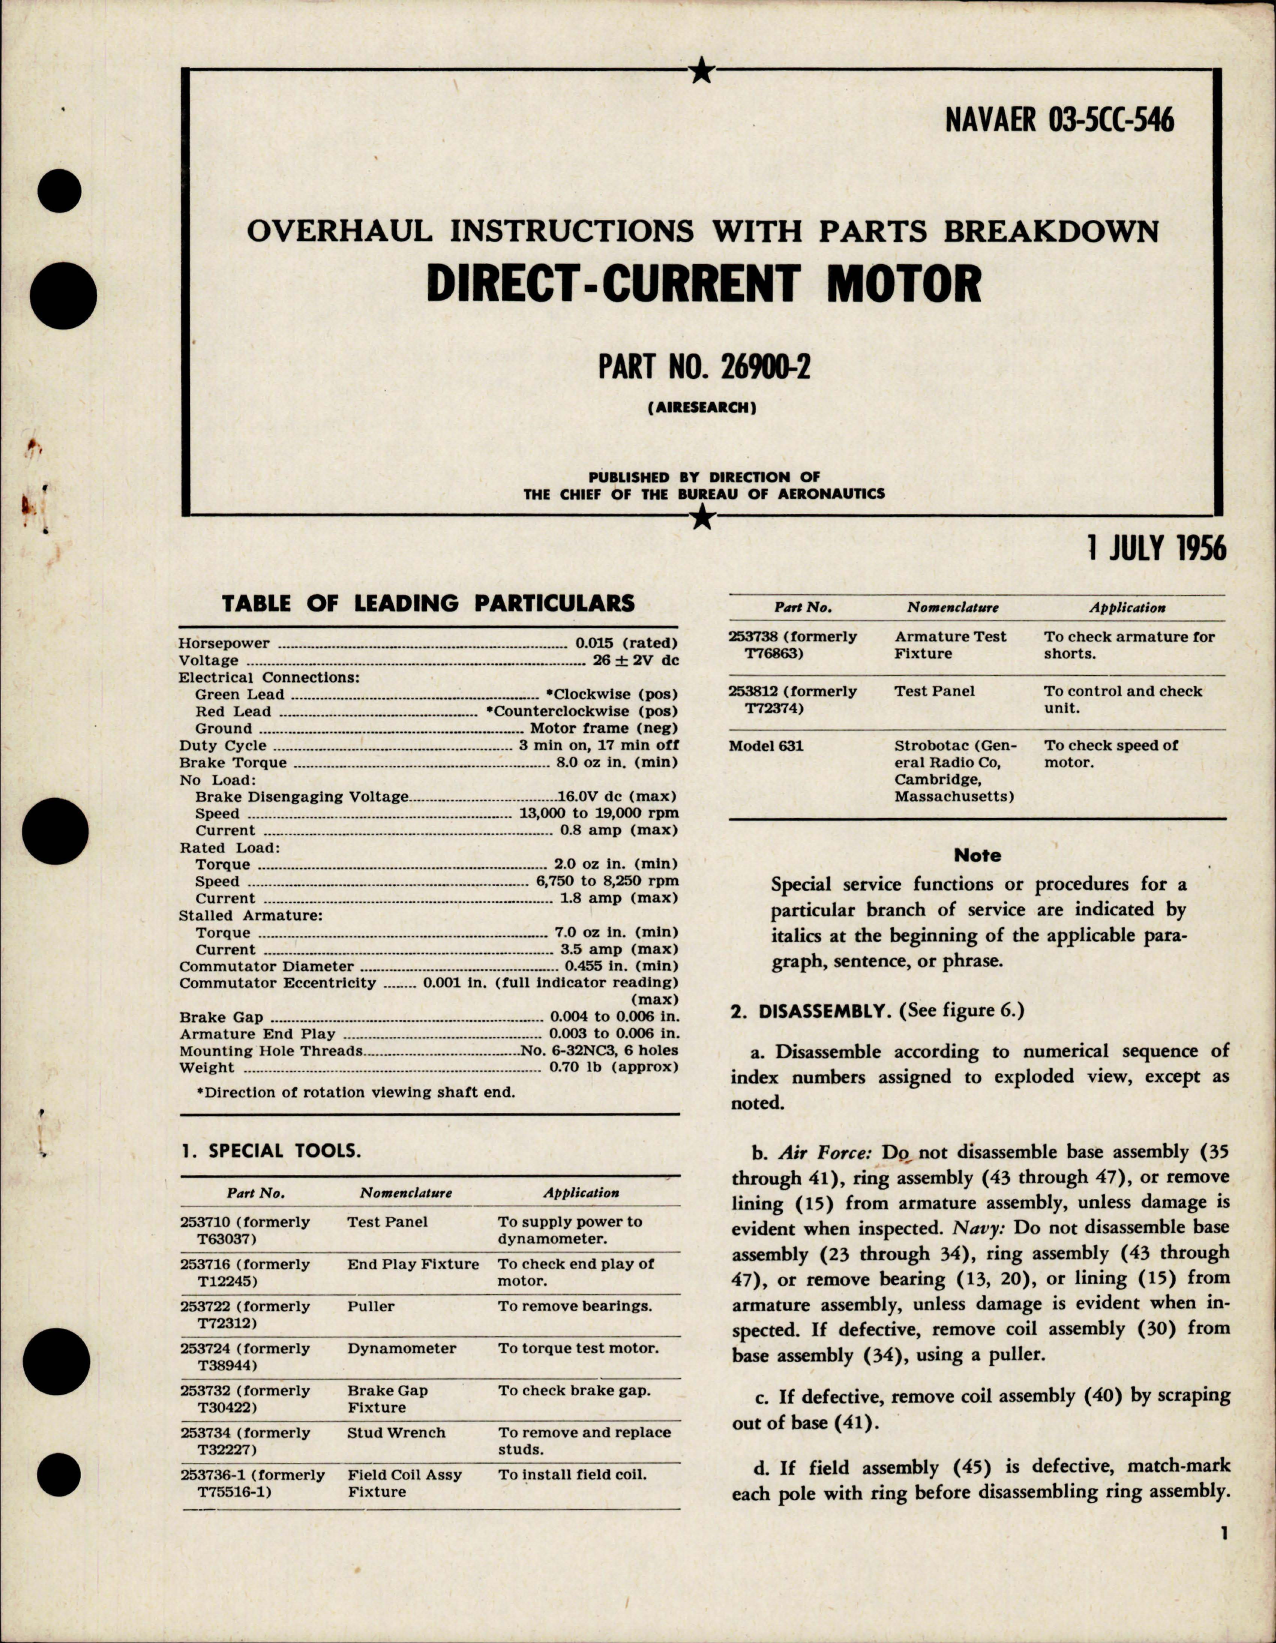 Sample page 1 from AirCorps Library document: Overhaul Instructions with Parts Breakdown for Direct Current Motor - Part 26900-2 